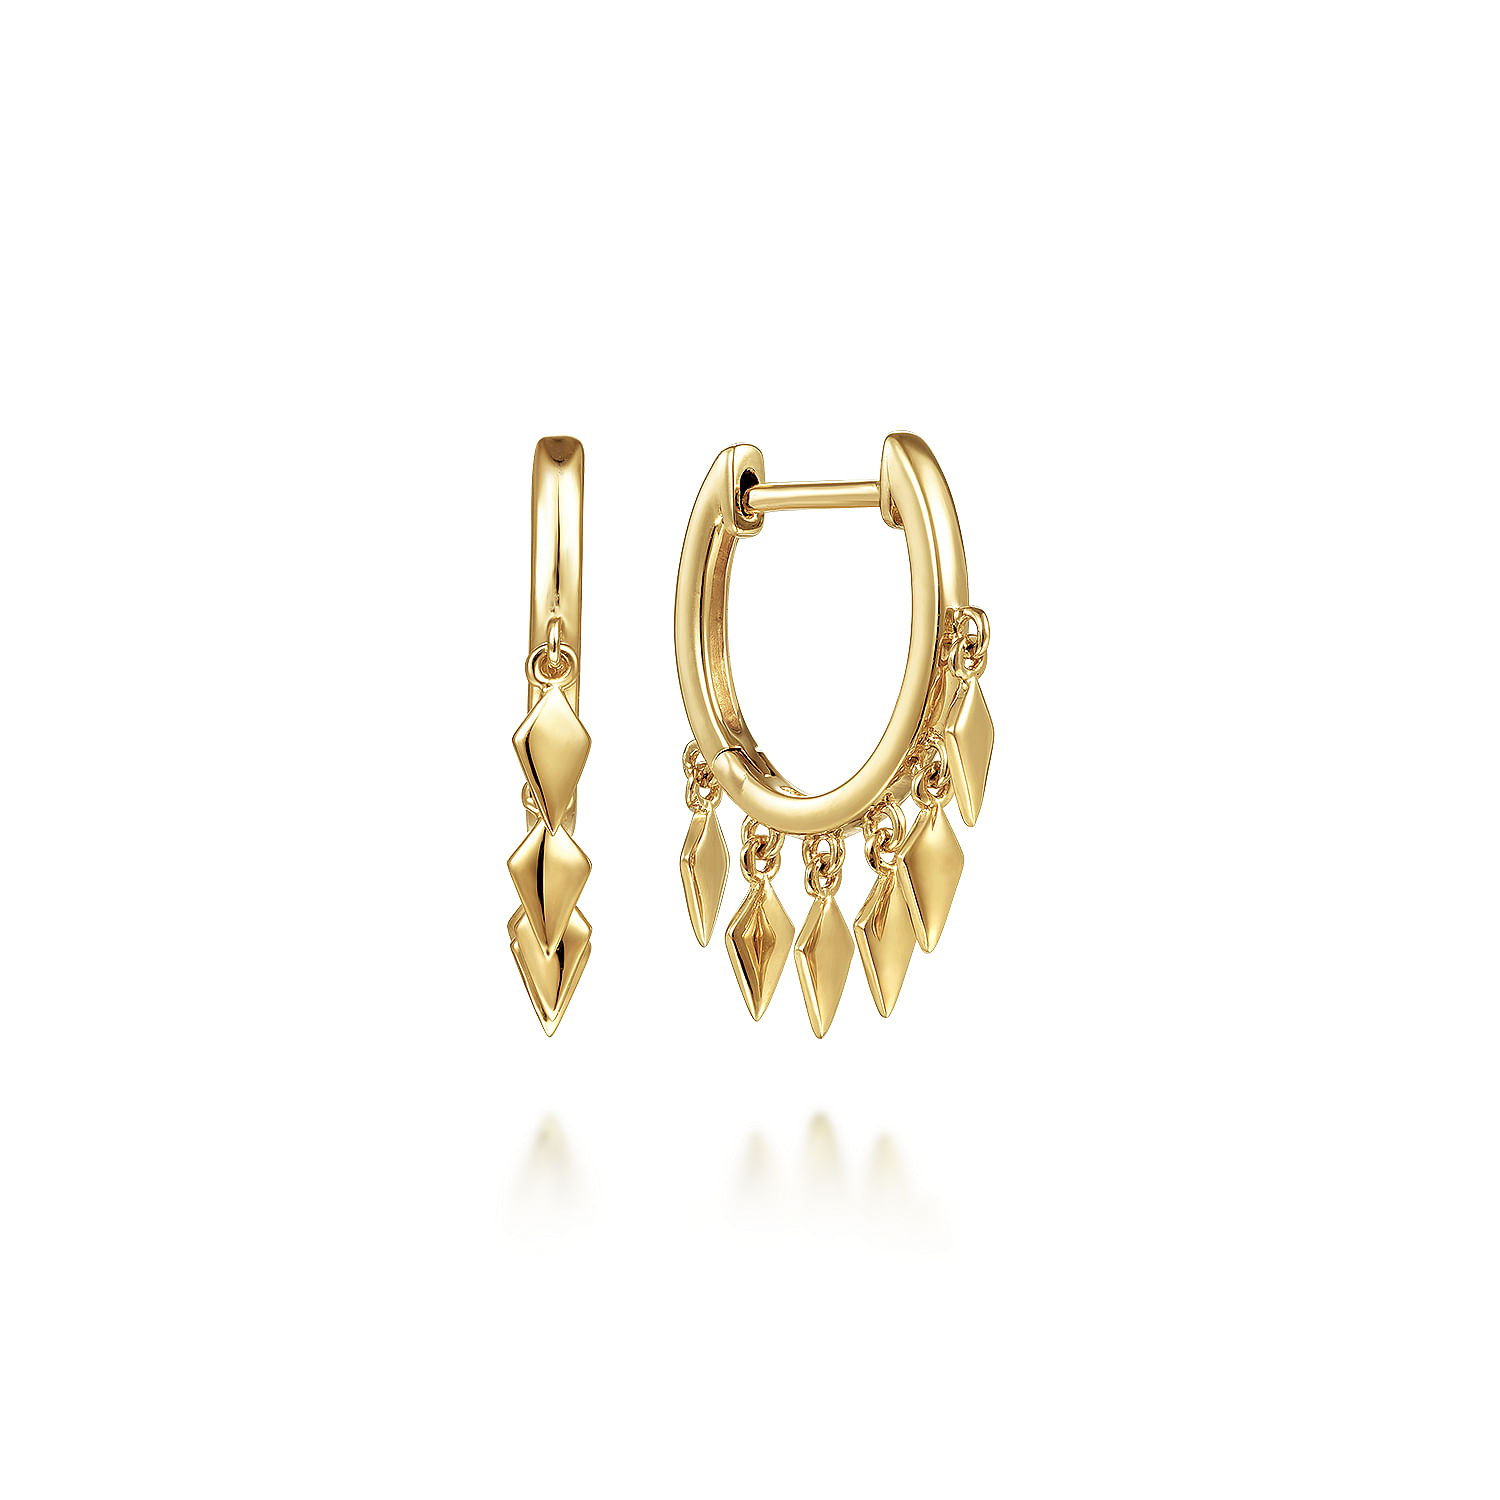 14K Yellow Gold Huggie Earrings with Spike Drops